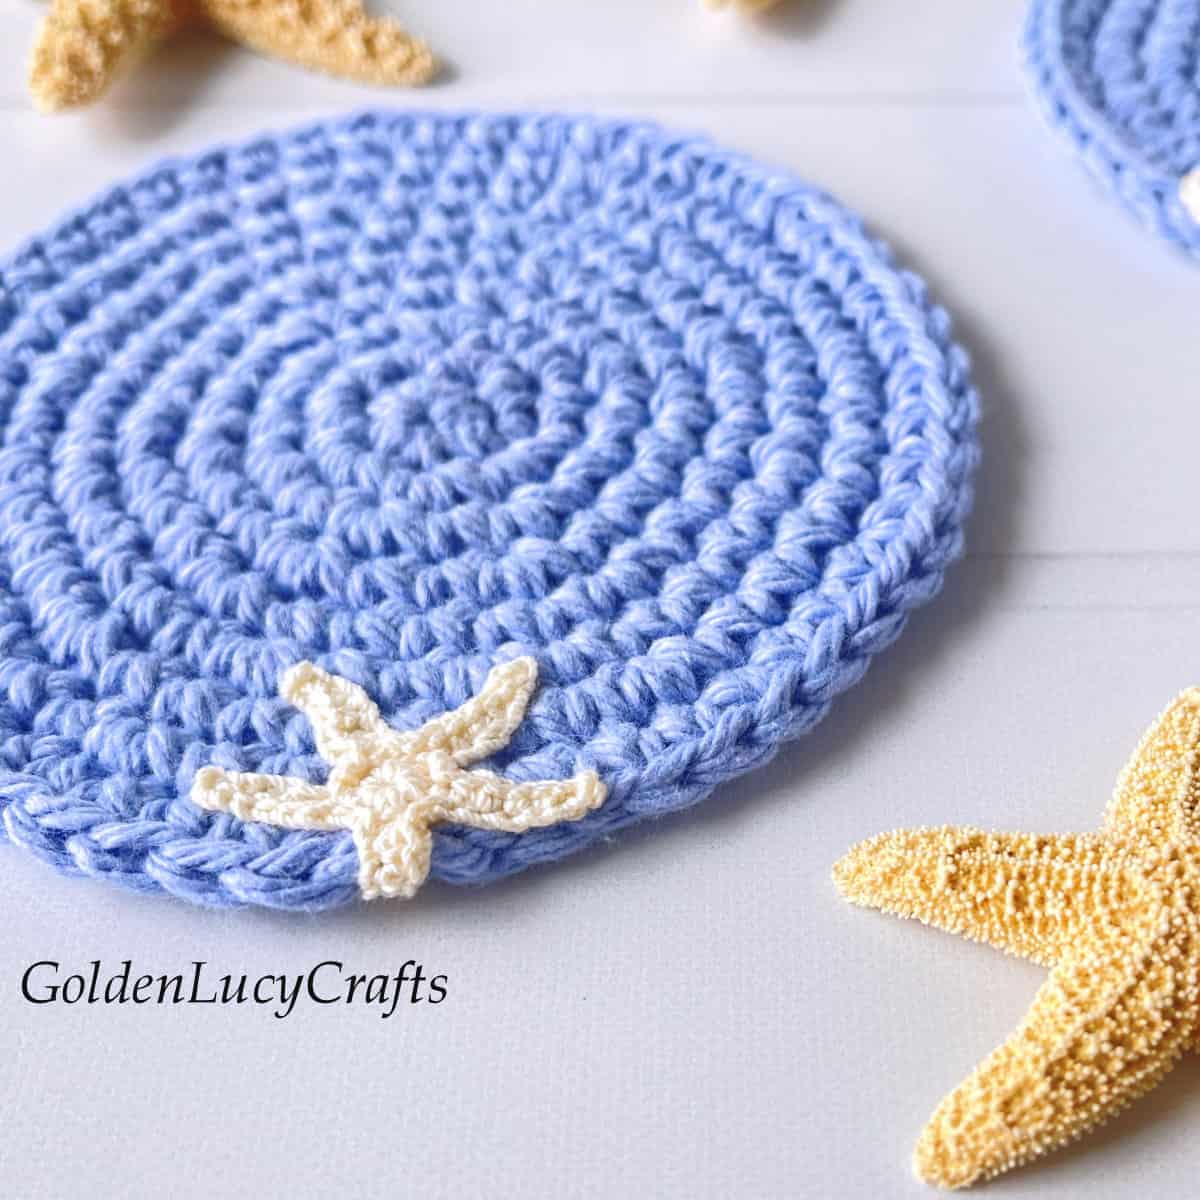 Crocheted coaster embellished with sea star applique.